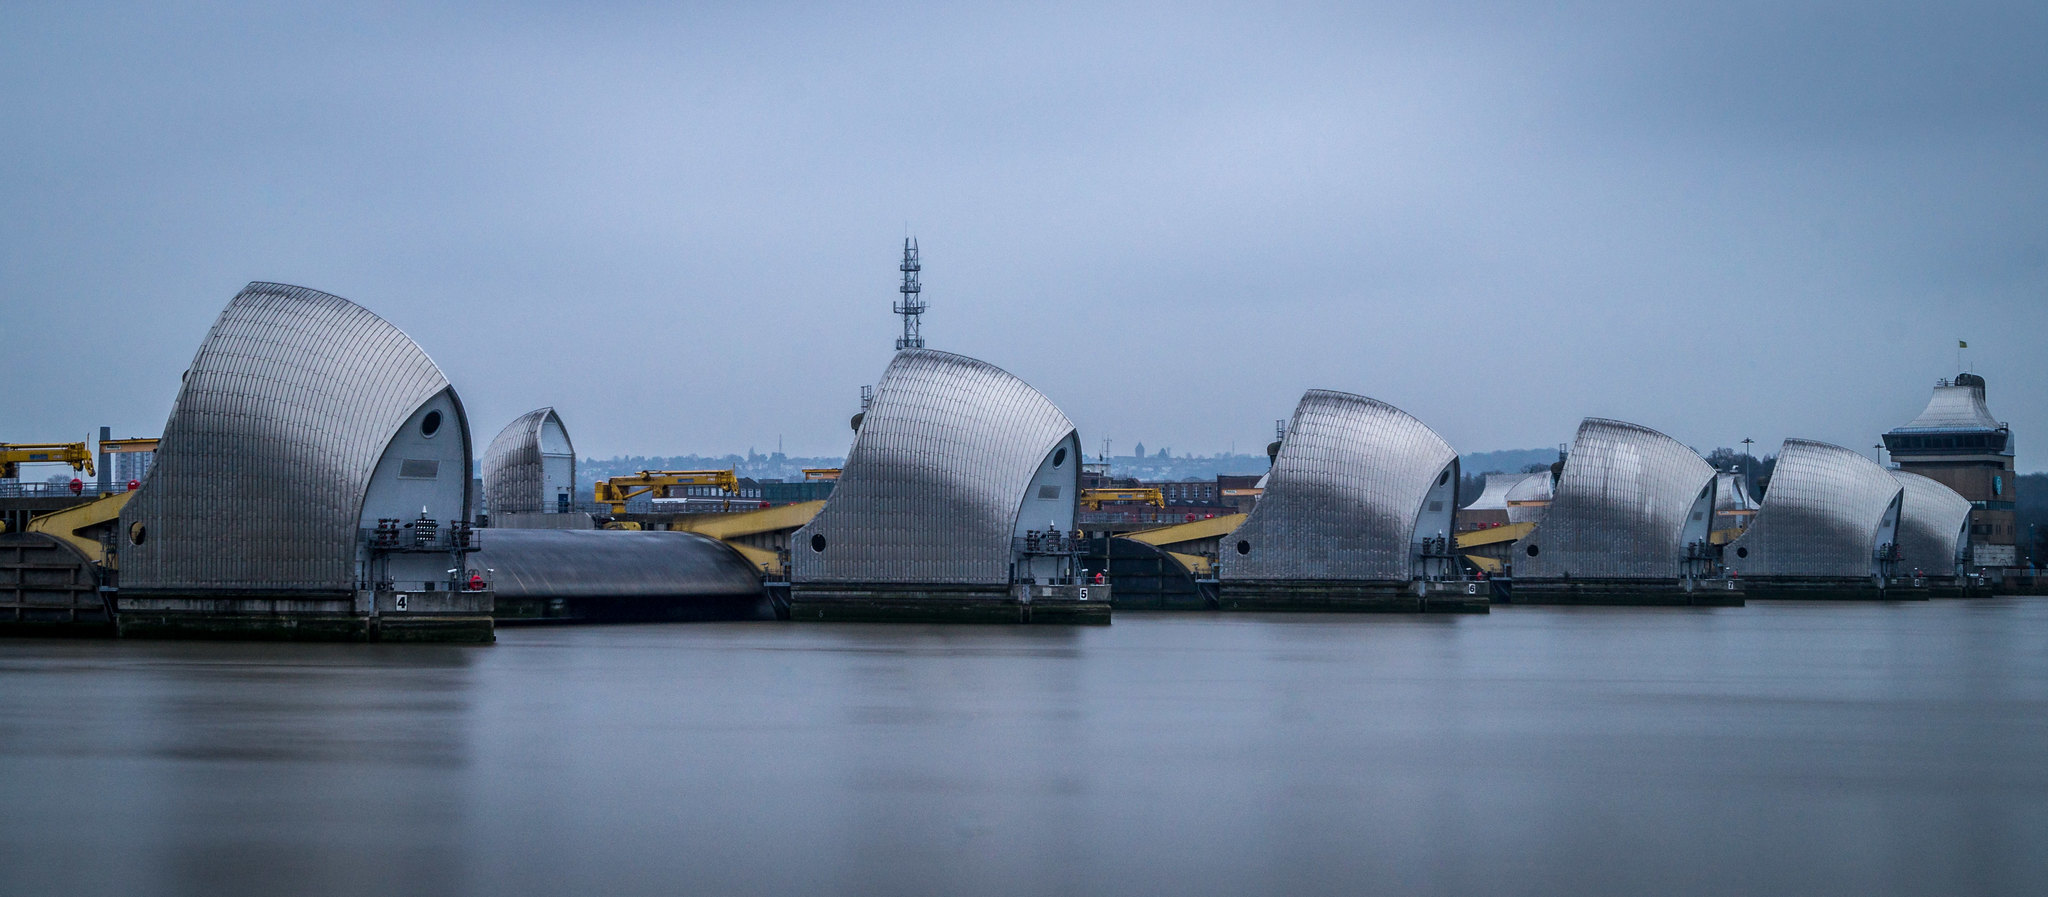 Higher Than Normal Tides Prompt Flood Warnings And Thames Barrier Closure News Shopper